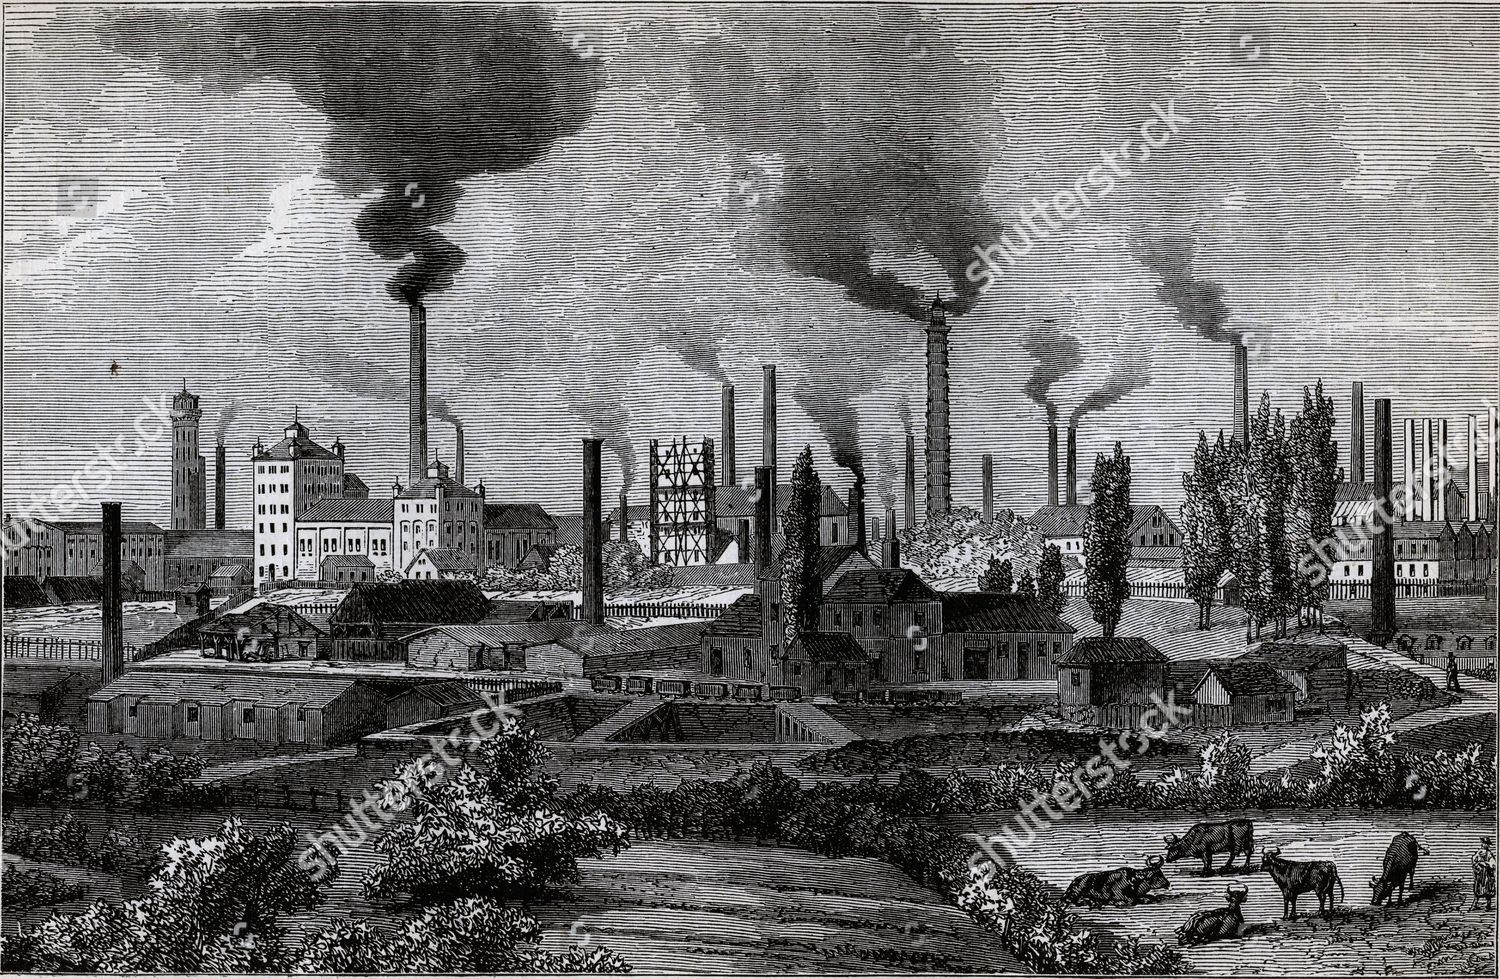 Krupps Steel Factory Essen Germany Illustration The Editorial Stock Photo Stock Image Shutterstock